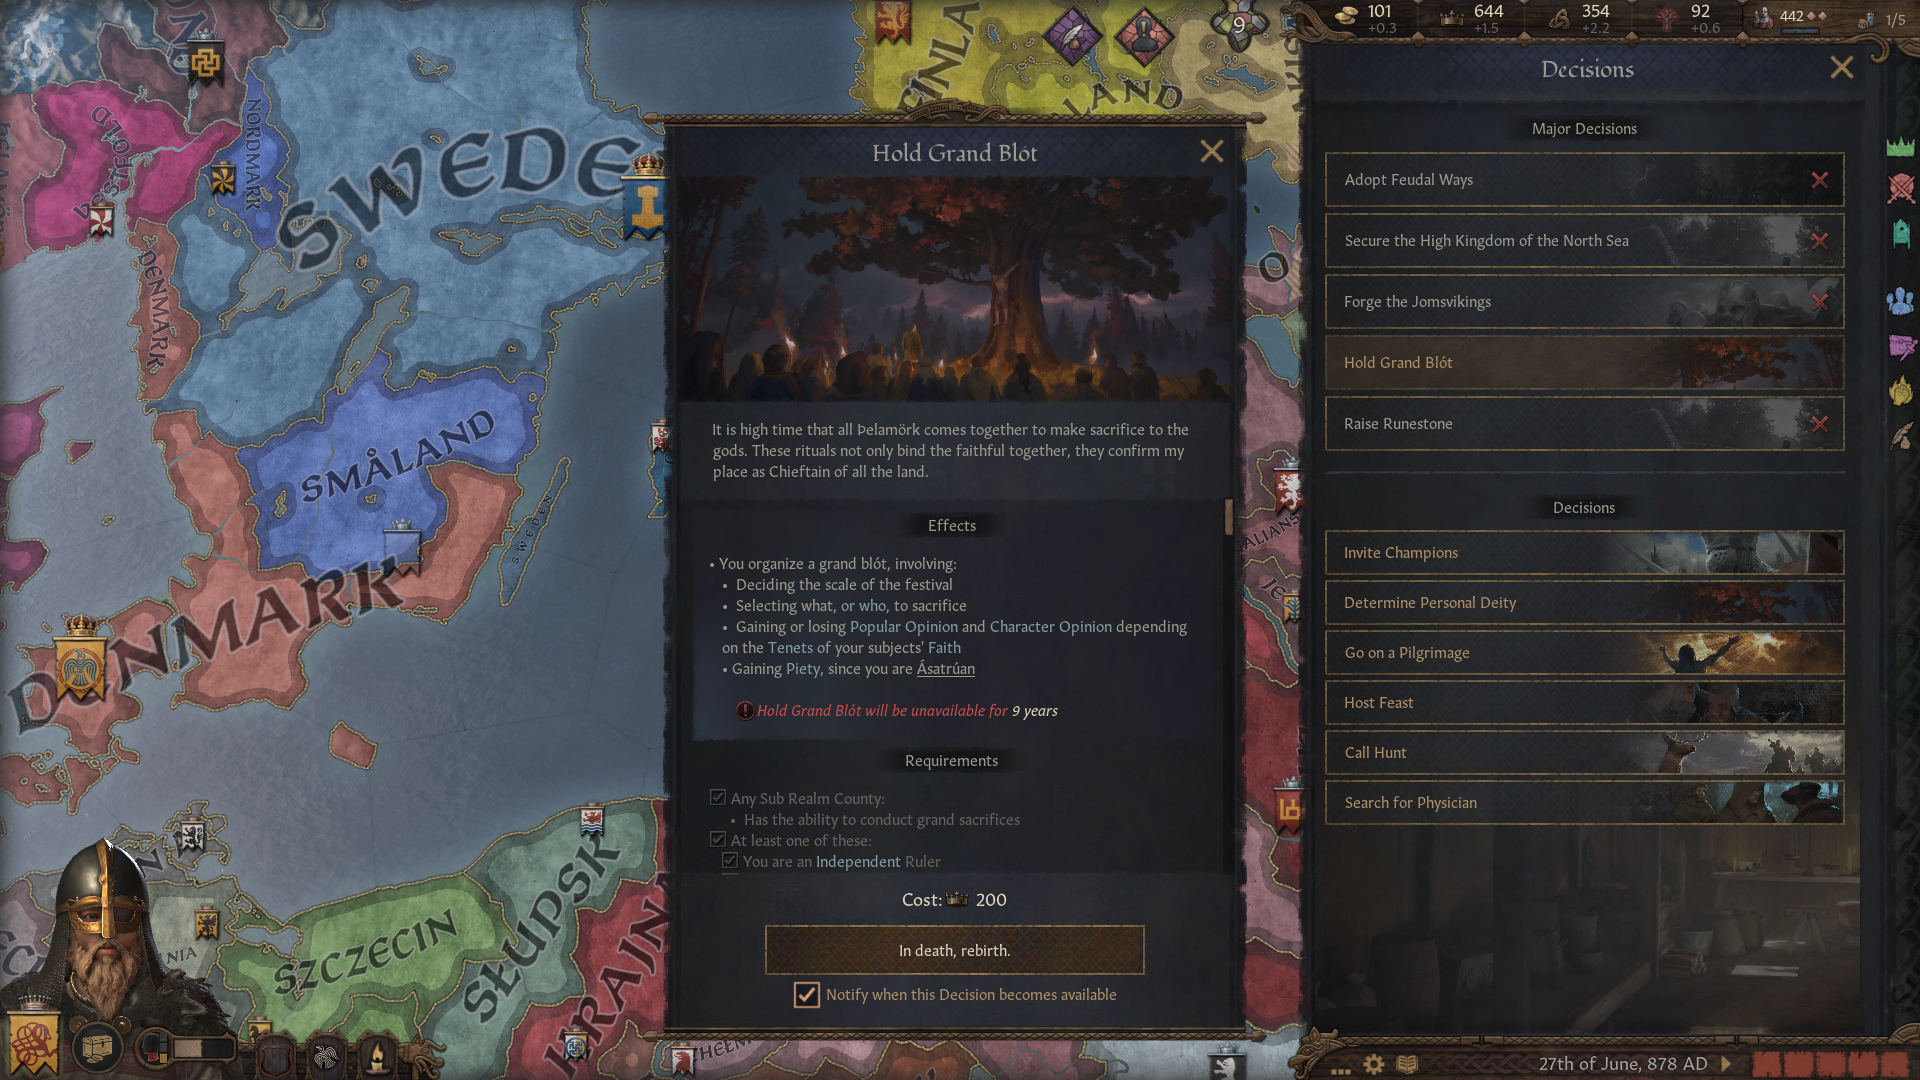 Crusader Kings 3 Northern Lords arrives on consoles November 17